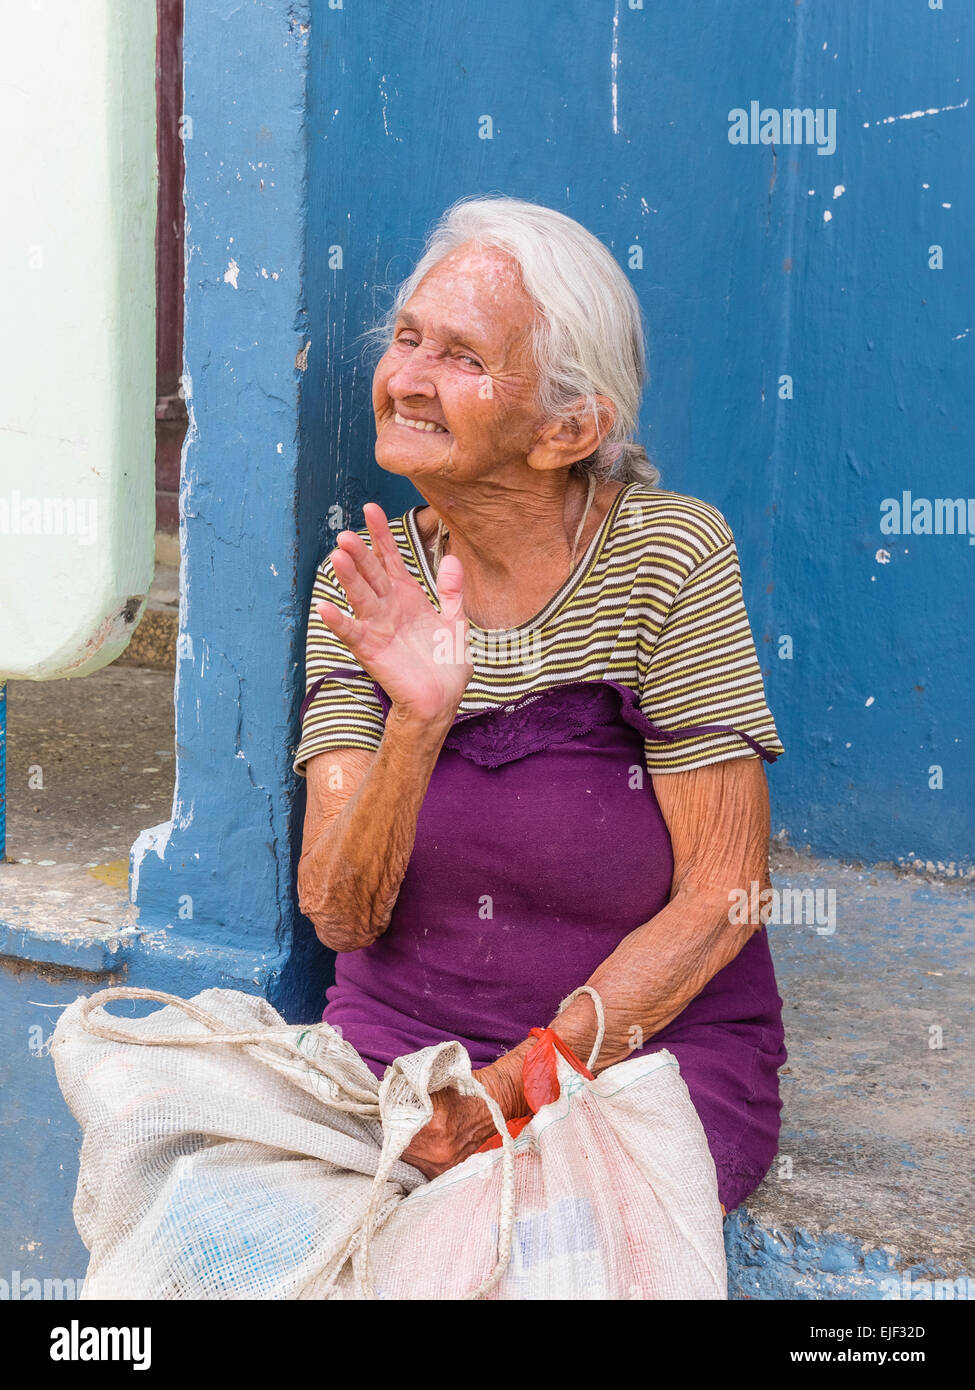 A funny female senior citizen gestures and smiles as she faces forward in  Siboney, Cuba Stock Photo - Alamy